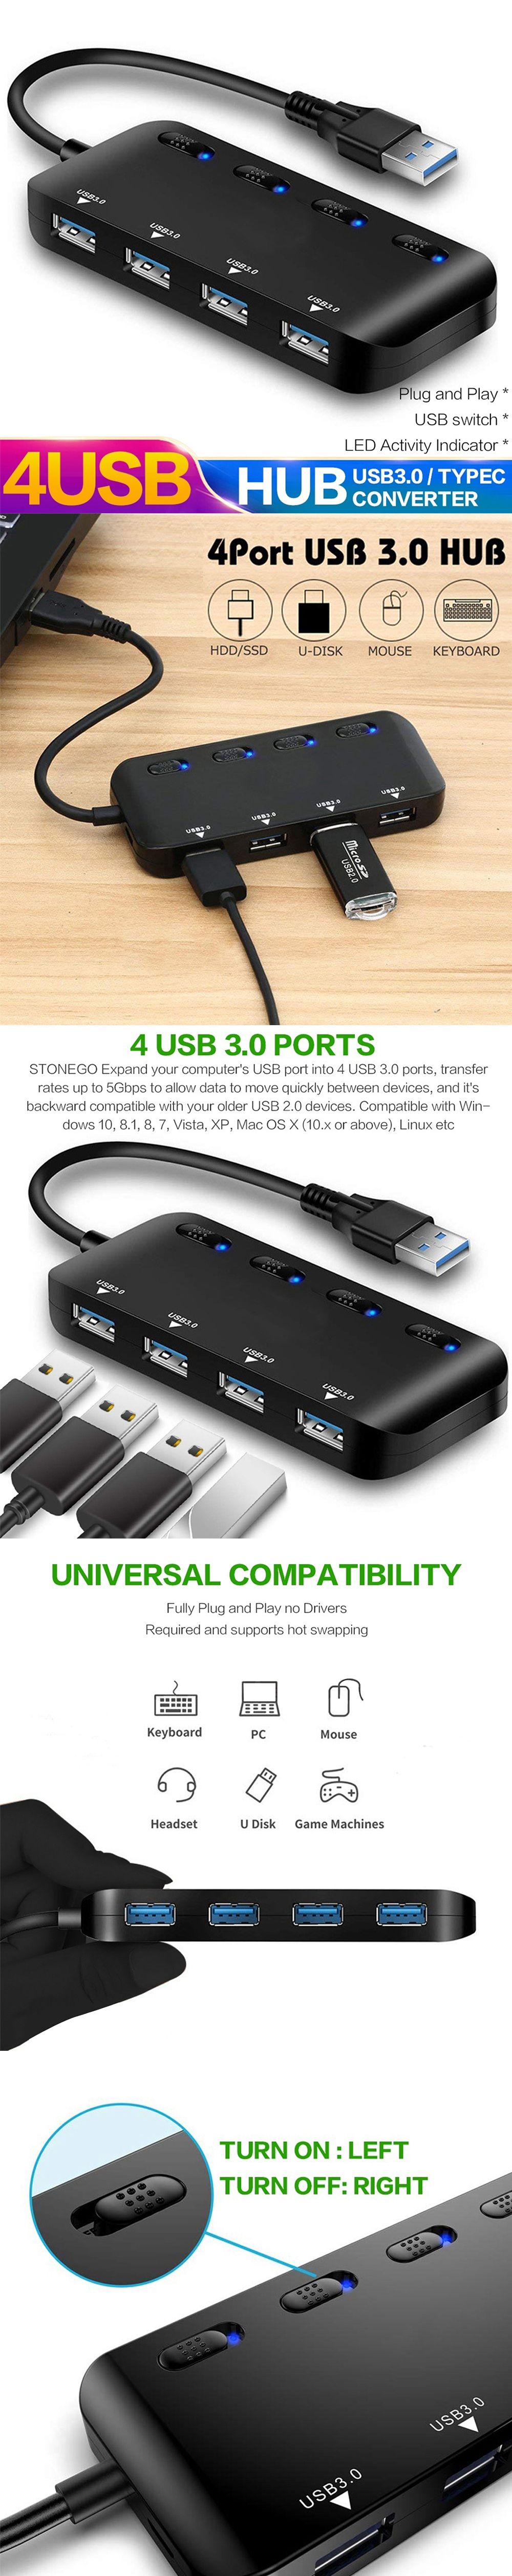 USB30--Type-C-4-in-1-Multifunction-USB-Hub-USB30-High-Speed-Transmission-with-Switch-Adapter-Extende-1598302